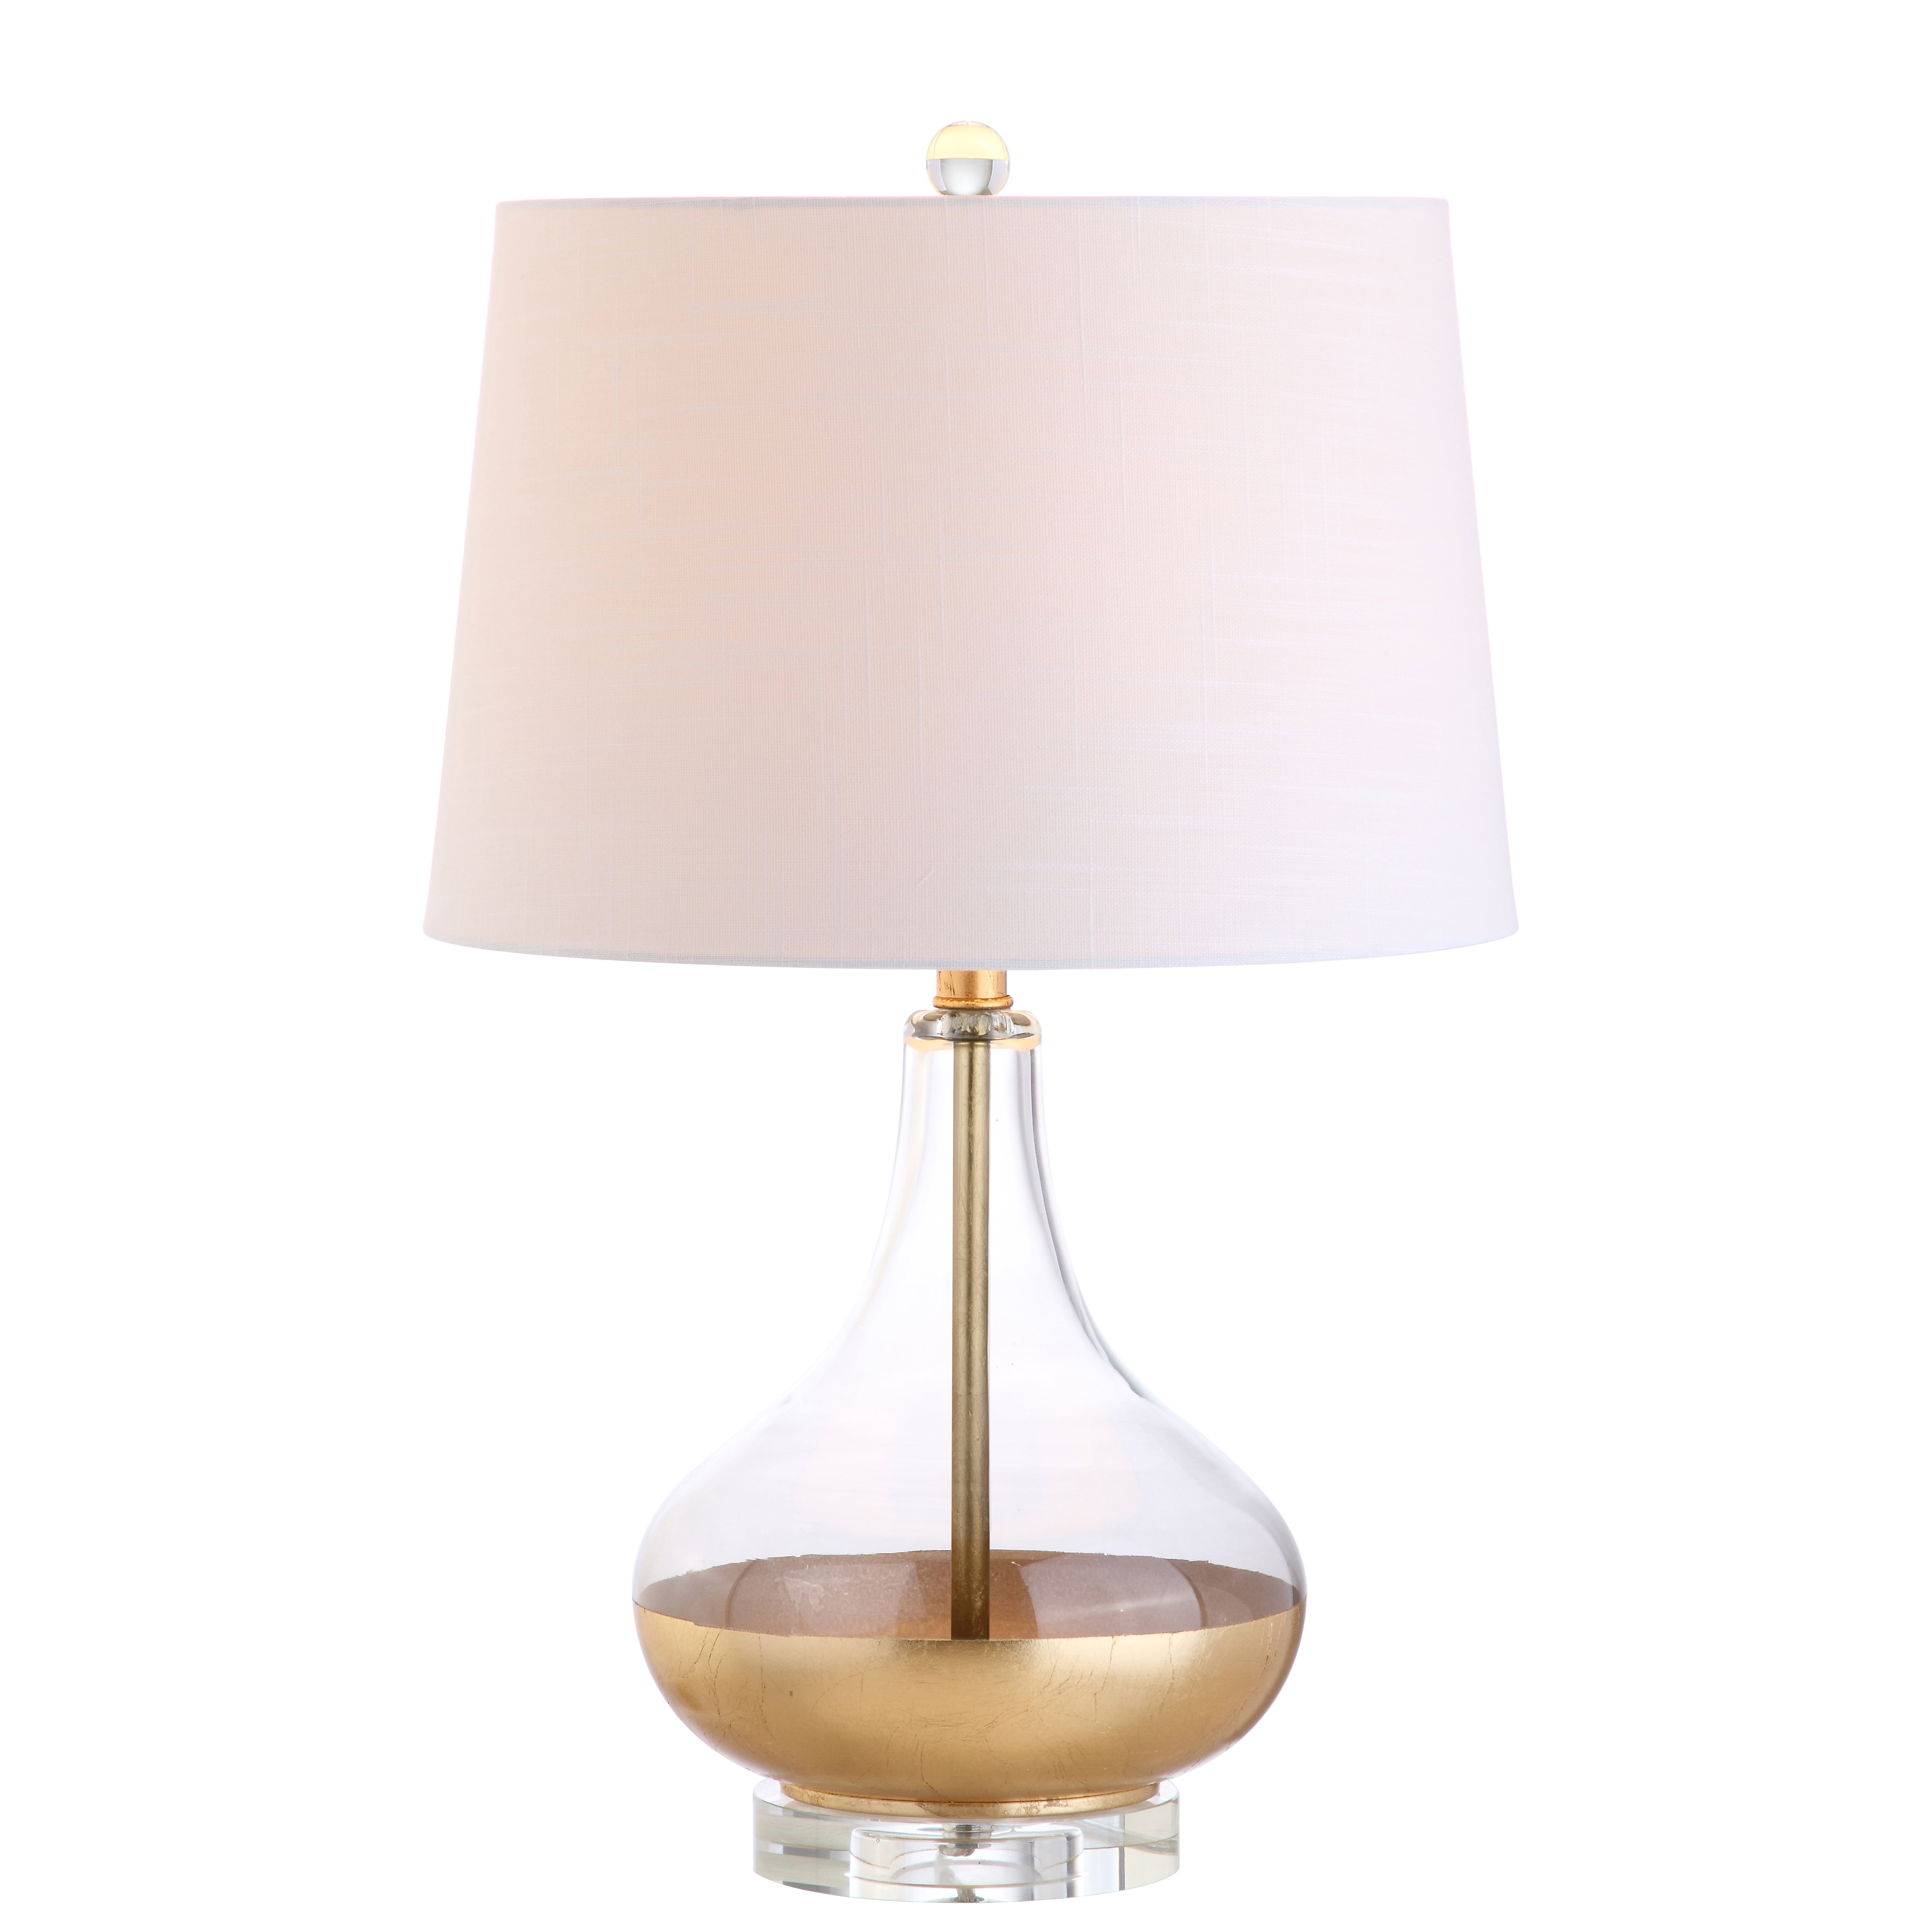 Crystal Touch Table Lamp Antique Brass - Harvey Norman Lighting